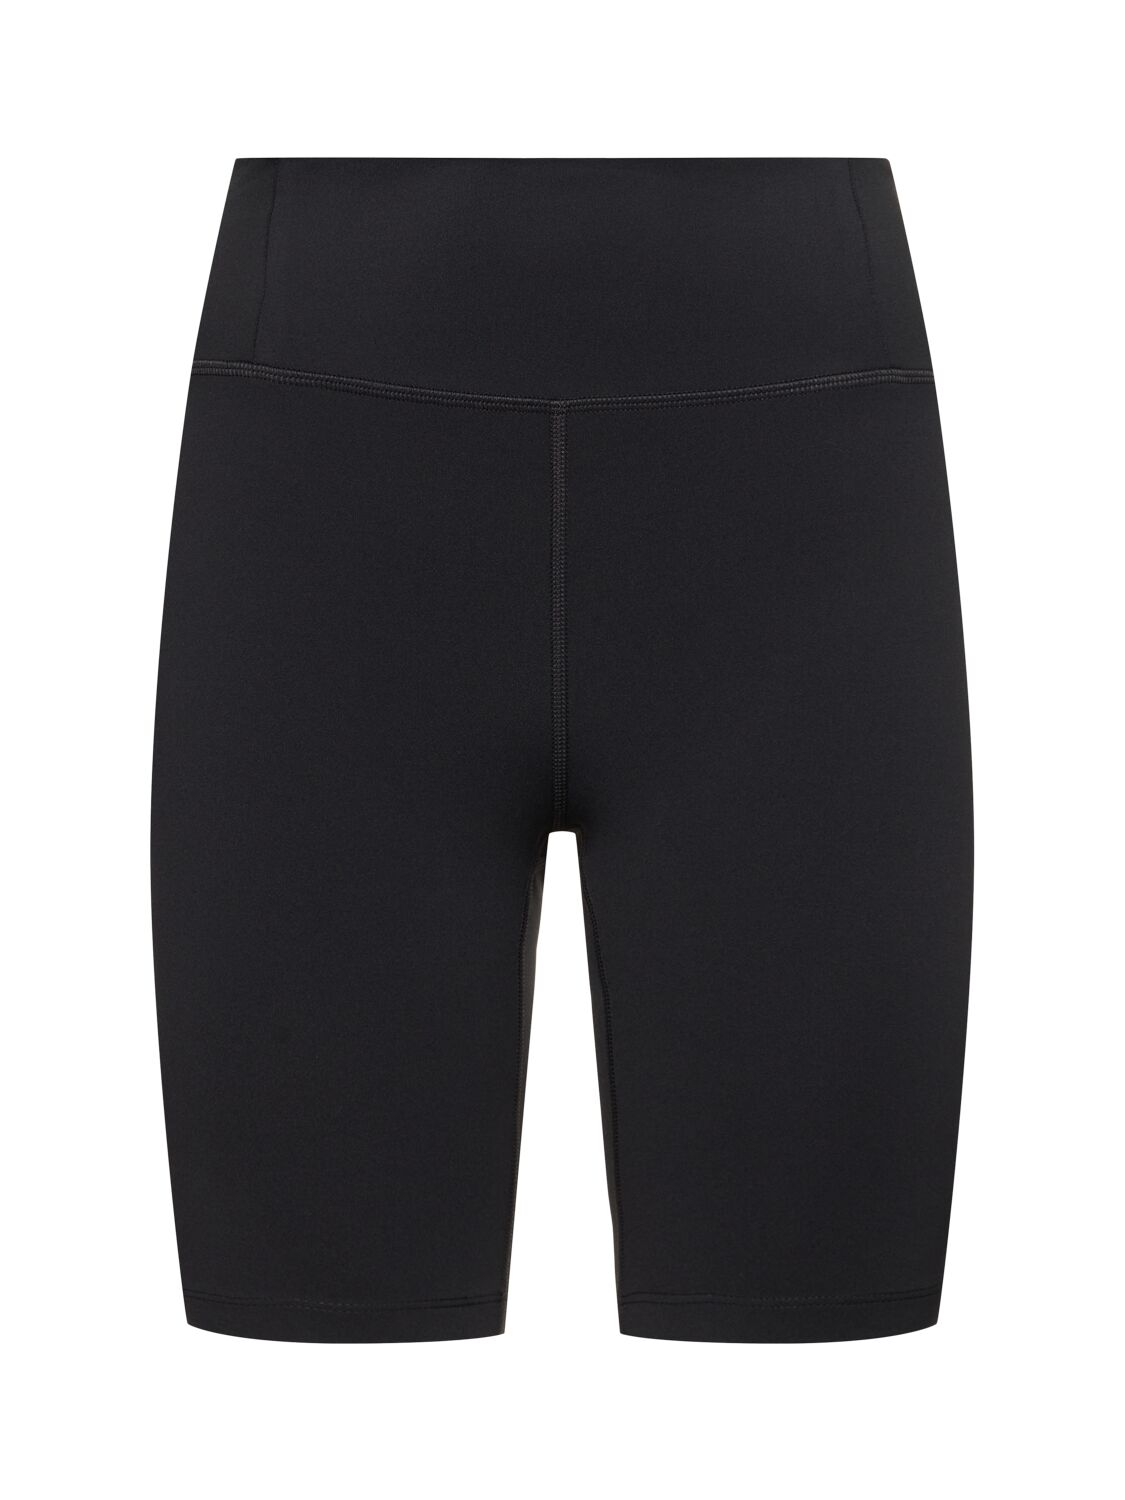 Girlfriend Collective Float Seamless Bike Shorts In Black